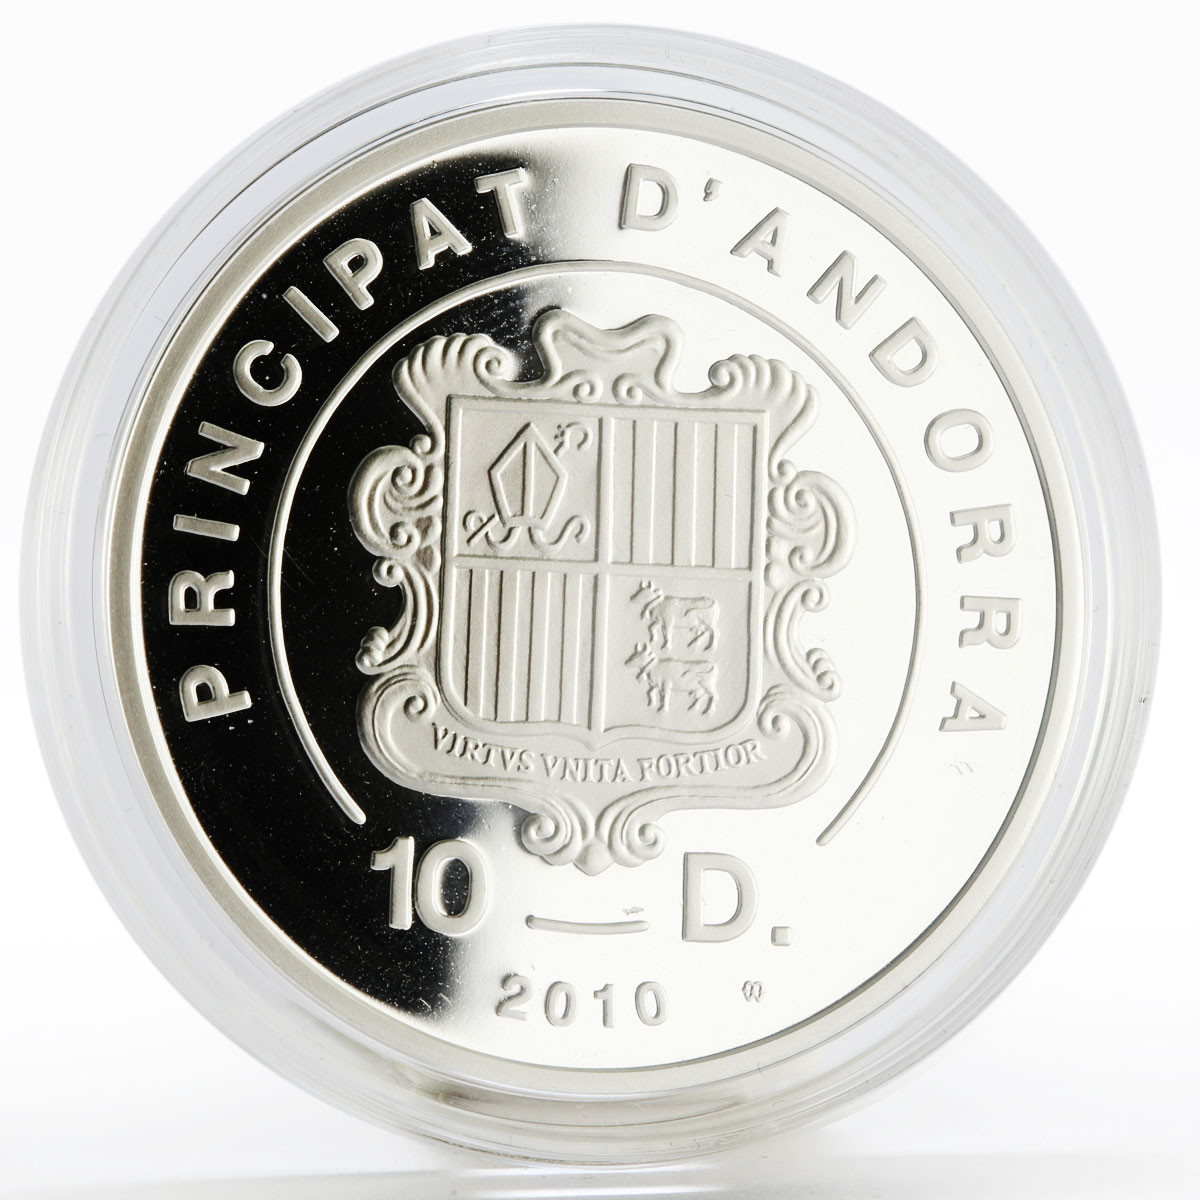 Andorra 10 dinars Holy Helpers series St. Barbara silver proof coin 2010